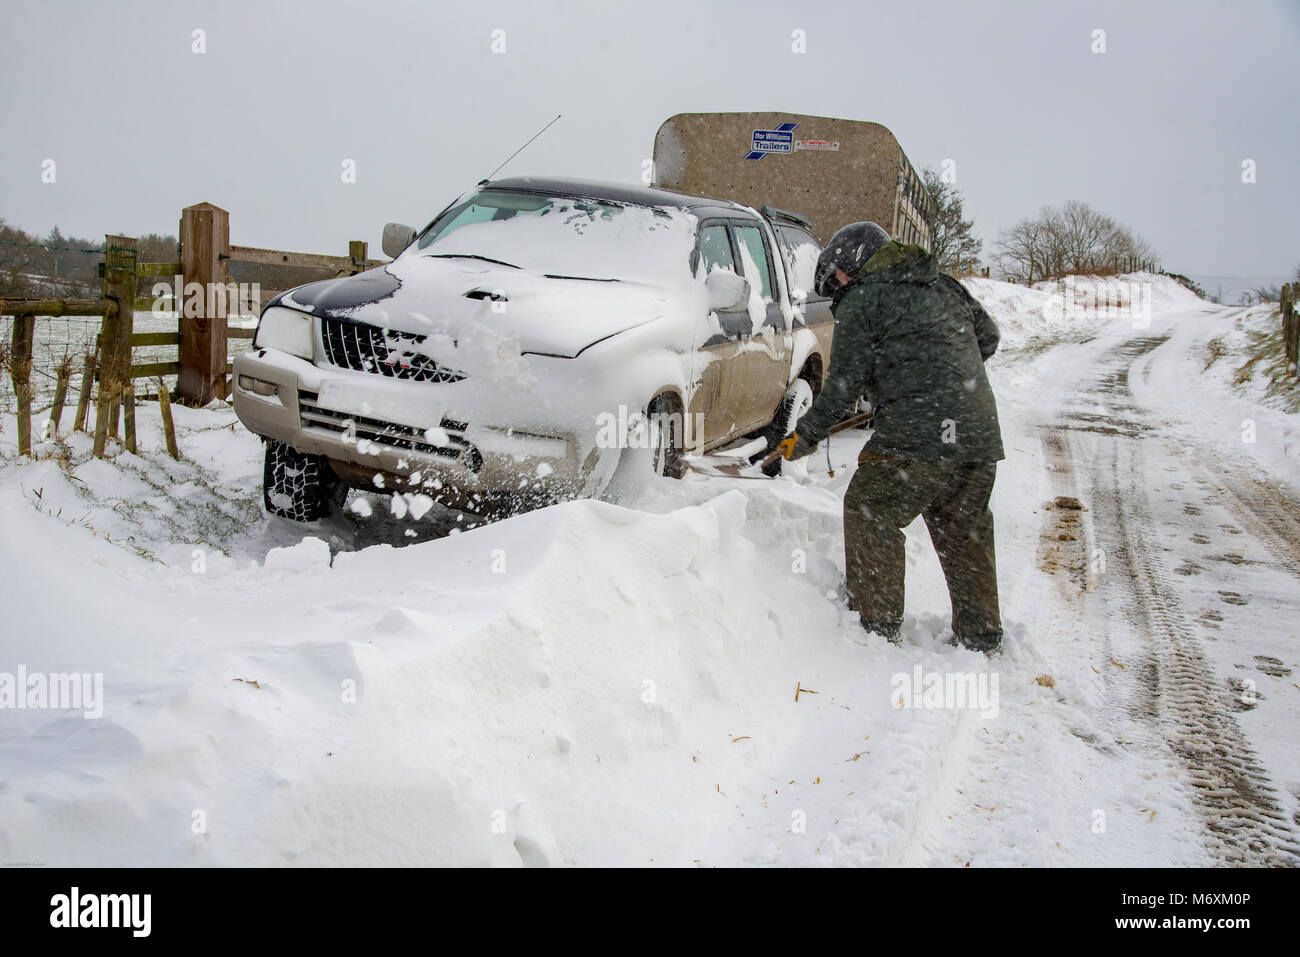 A farmer digs his four wheel drive vehicle and livestock trailer out of the drifting snow at Chipping, Preston, Lancashire. Stock Photo